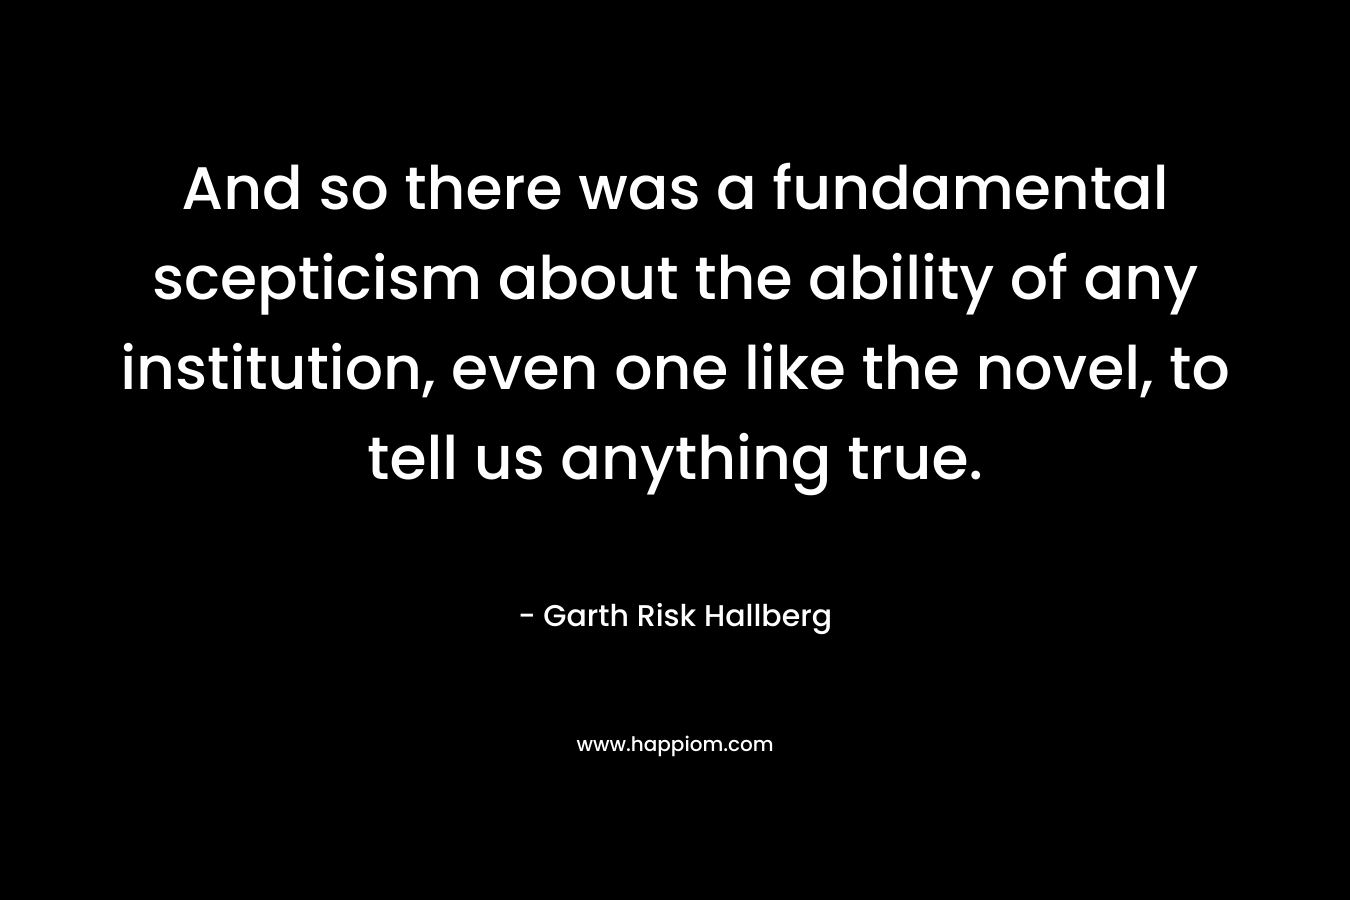 And so there was a fundamental scepticism about the ability of any institution, even one like the novel, to tell us anything true. – Garth Risk Hallberg